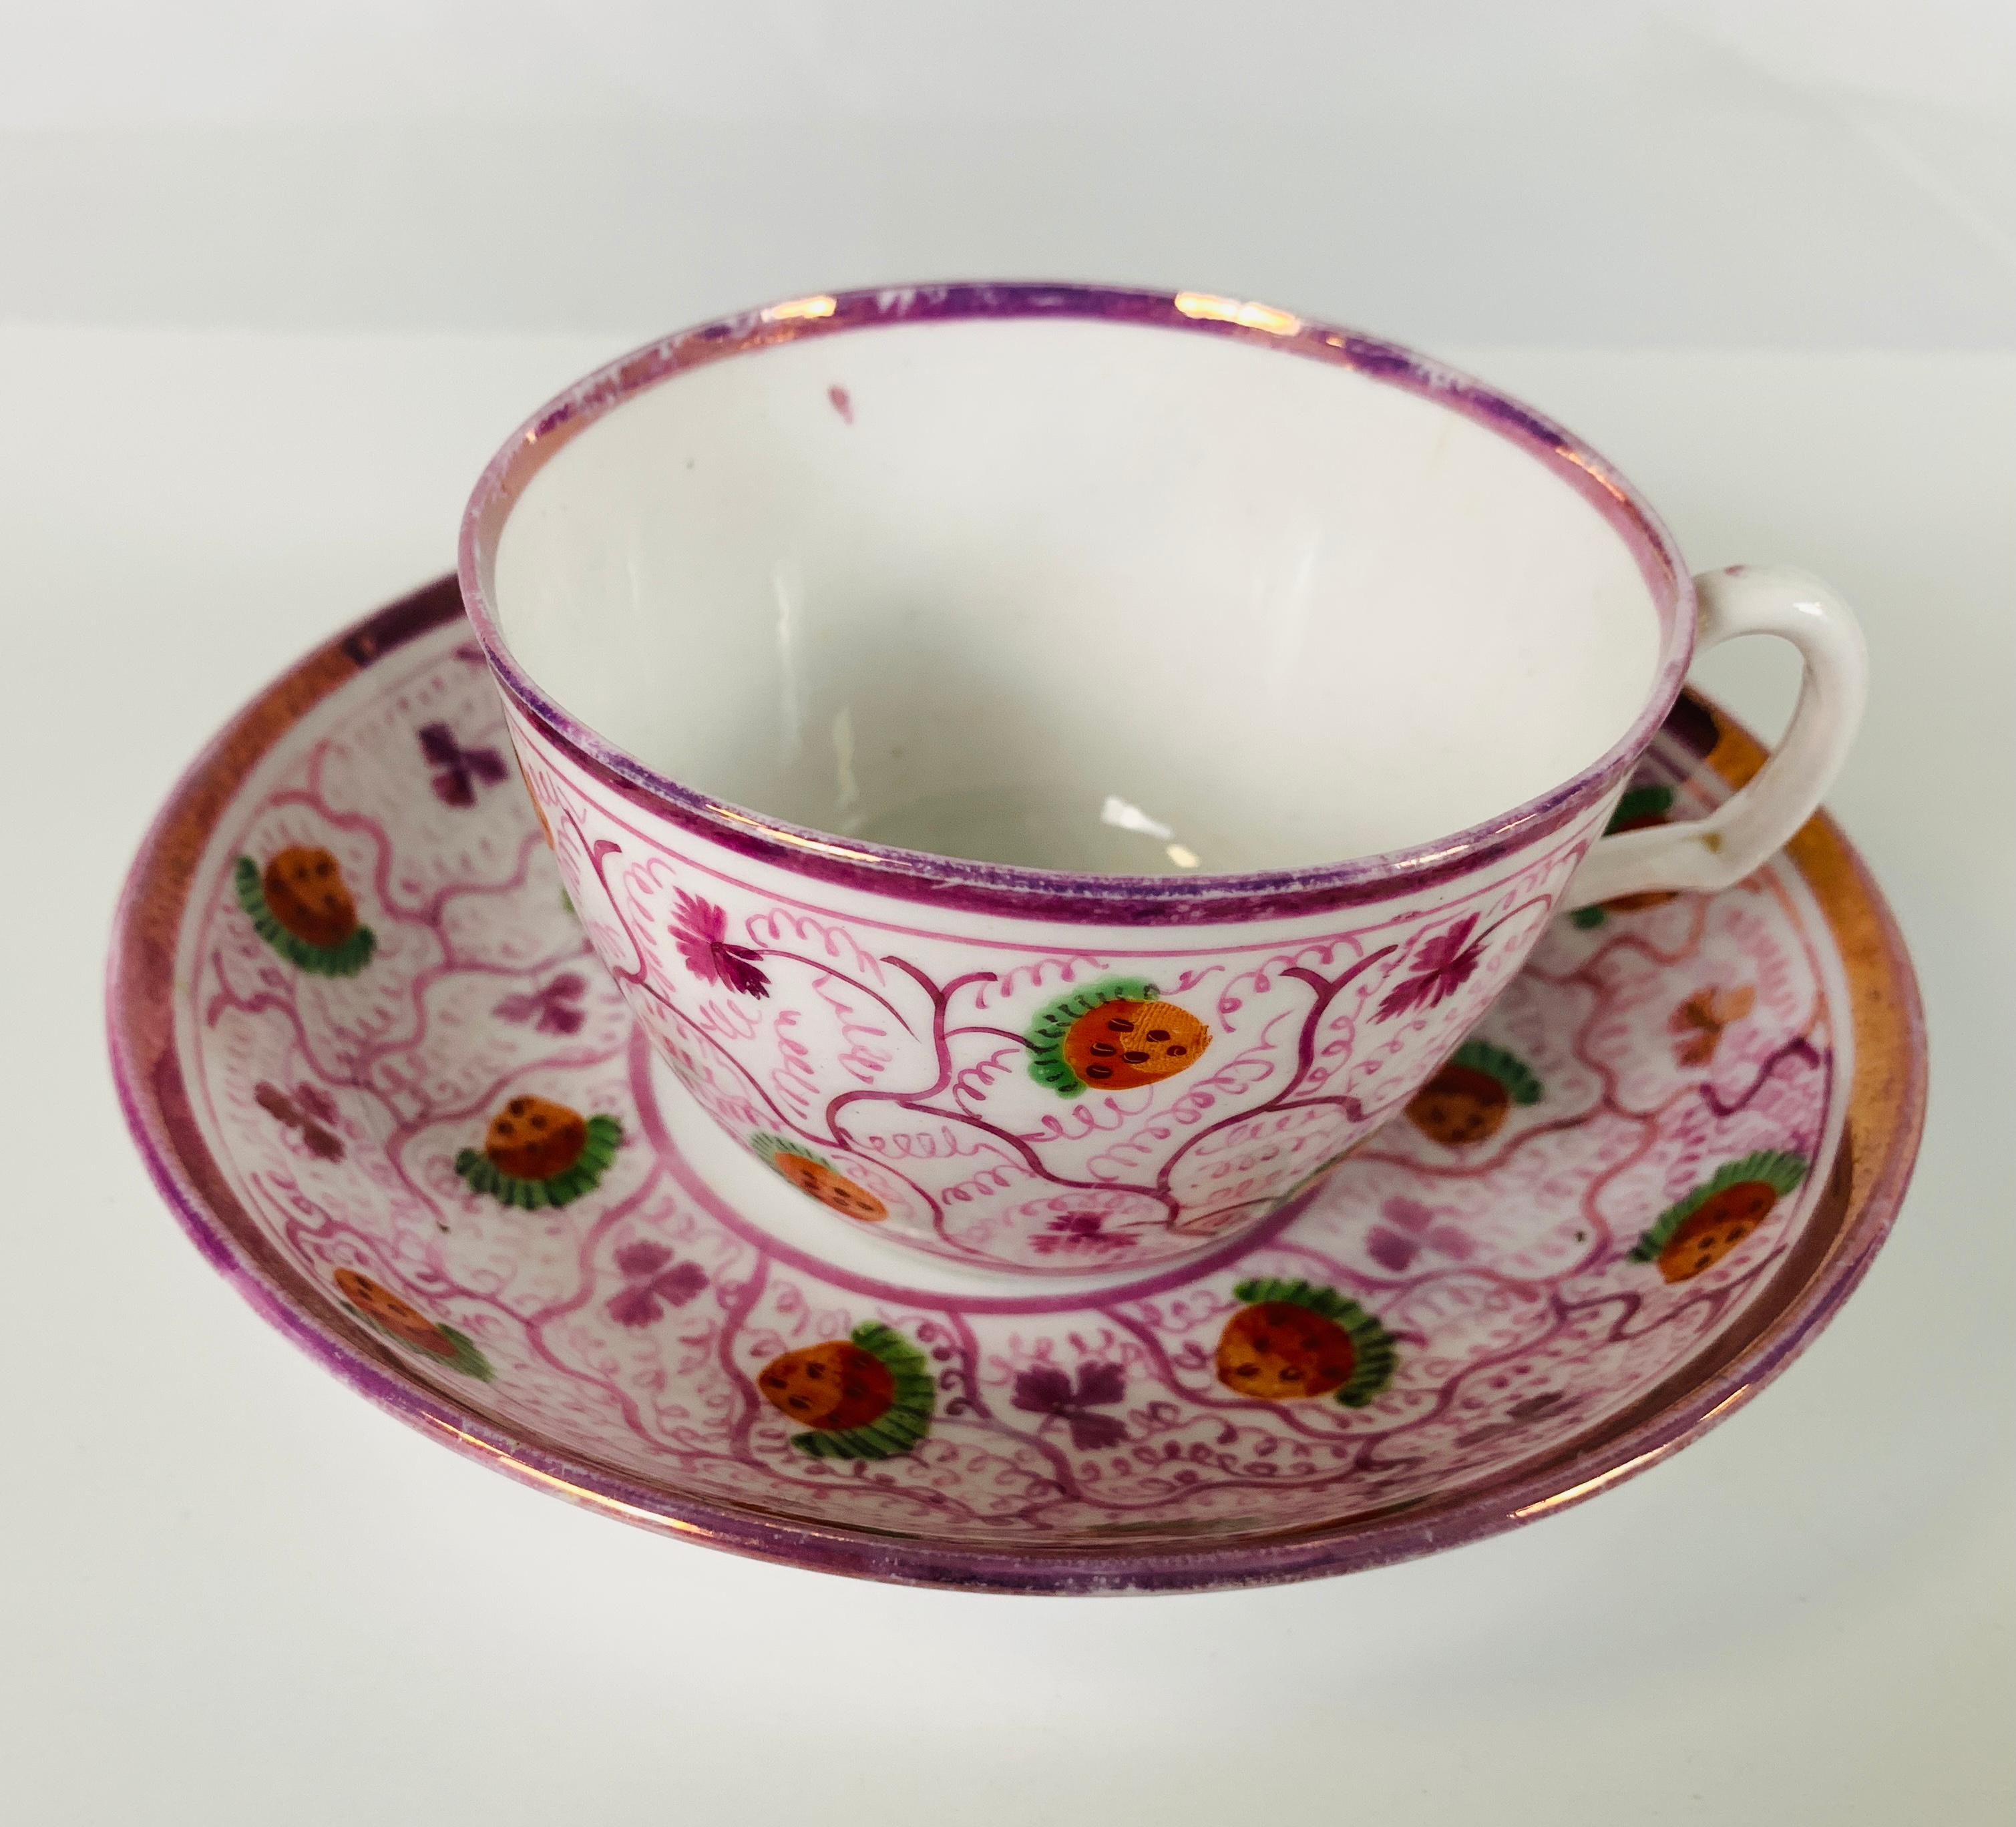 Provenance: The Private collection of Mario Buatta
A pair of pink luster teacups showing ripe English strawberries inside a luster trelliswork, with a single luscious strawberry at the center of the saucer.
Dimensions: 5.75